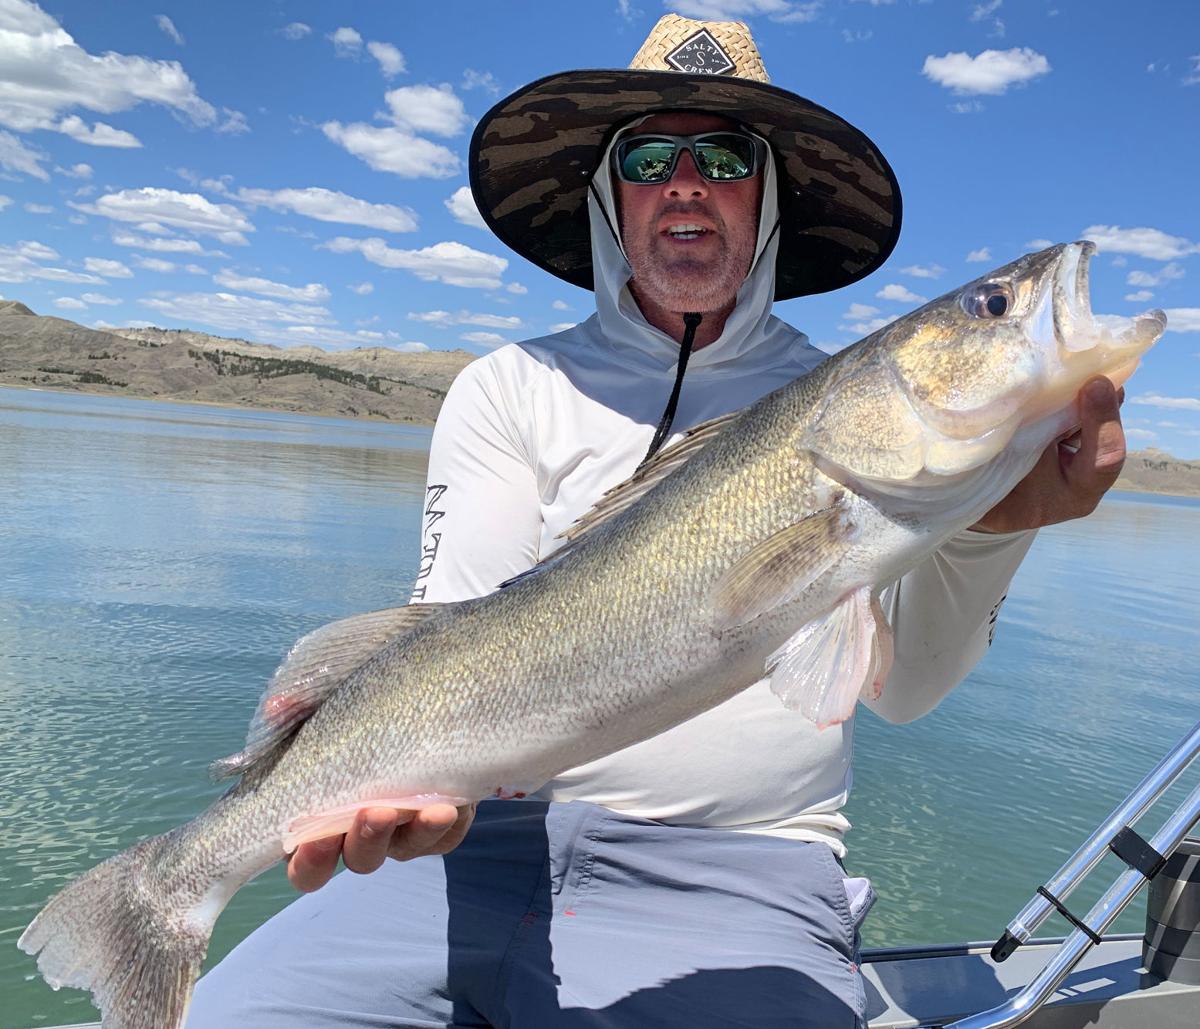 Fishing report: Bass bite is on at several lakes, lower